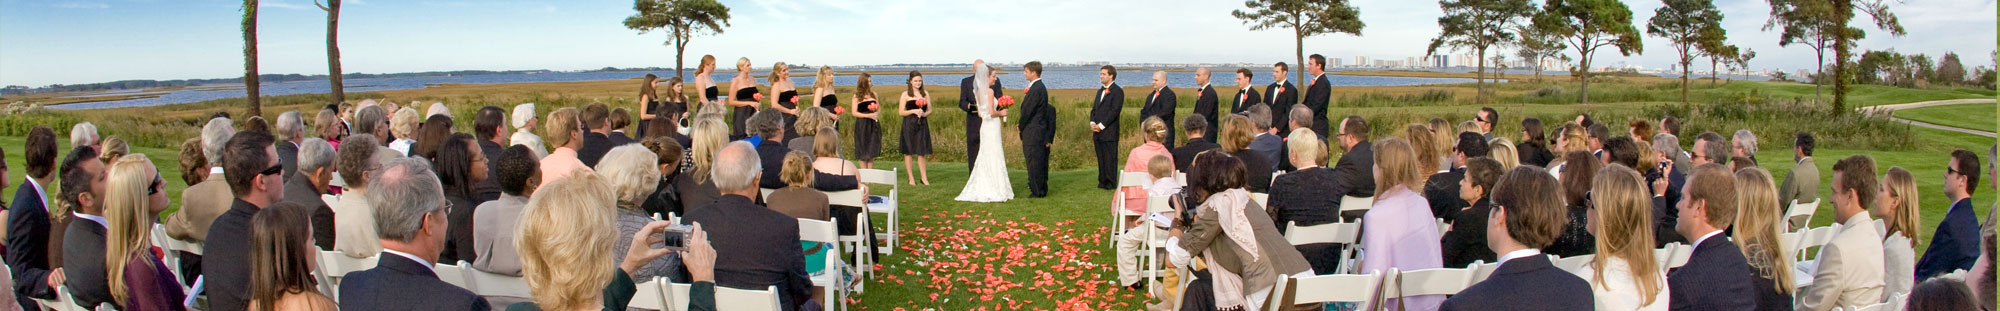 Lighthouse Sound Waterfront Wedding in Ocean City, MD.